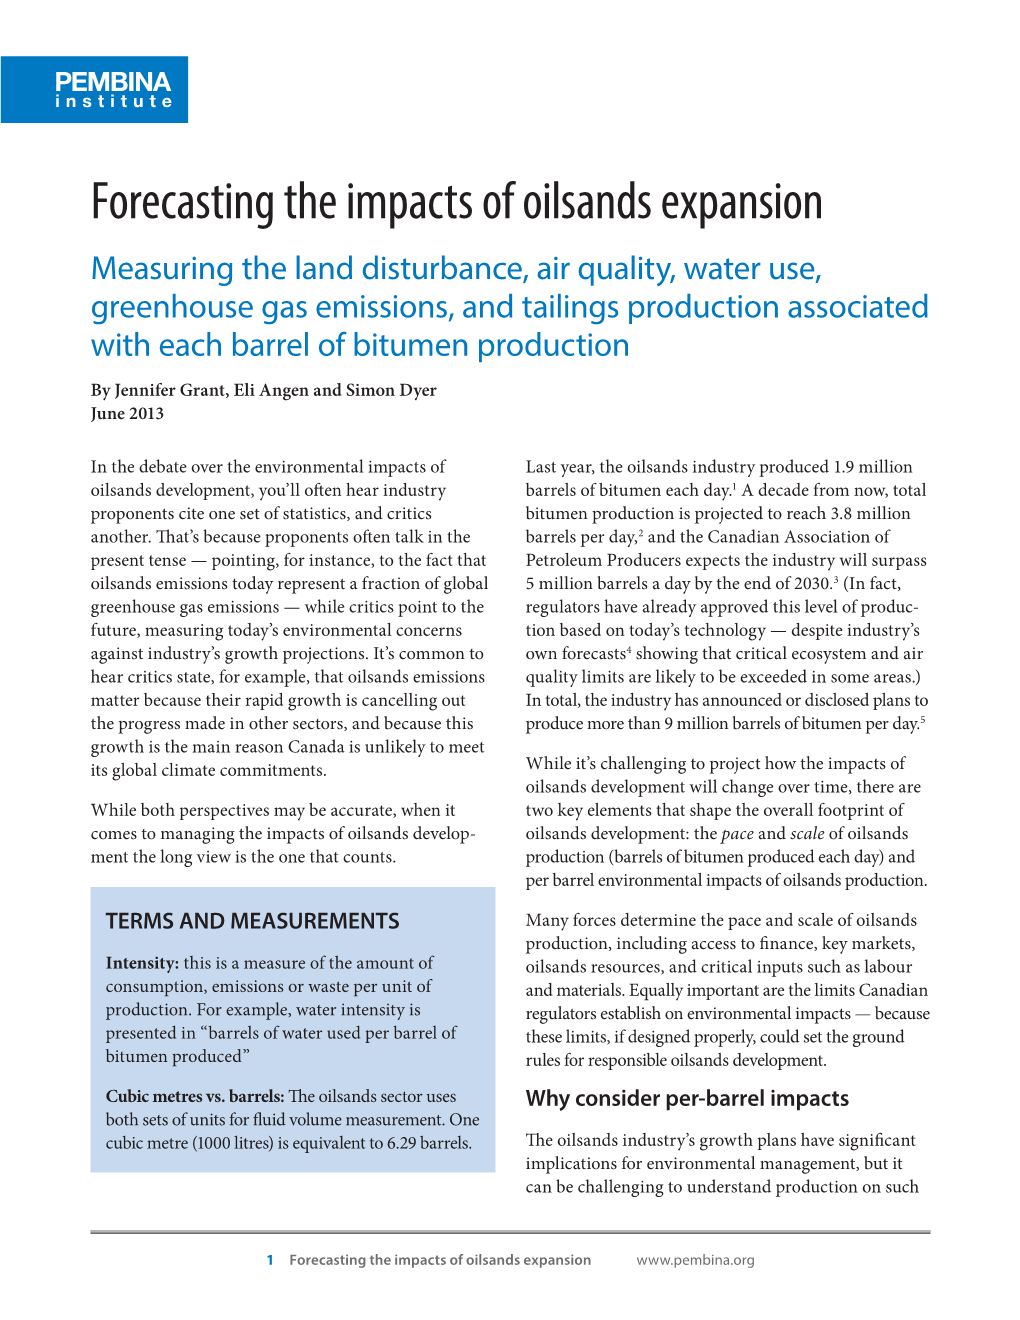 Forecasting the Impacts of Oilsands Expansion